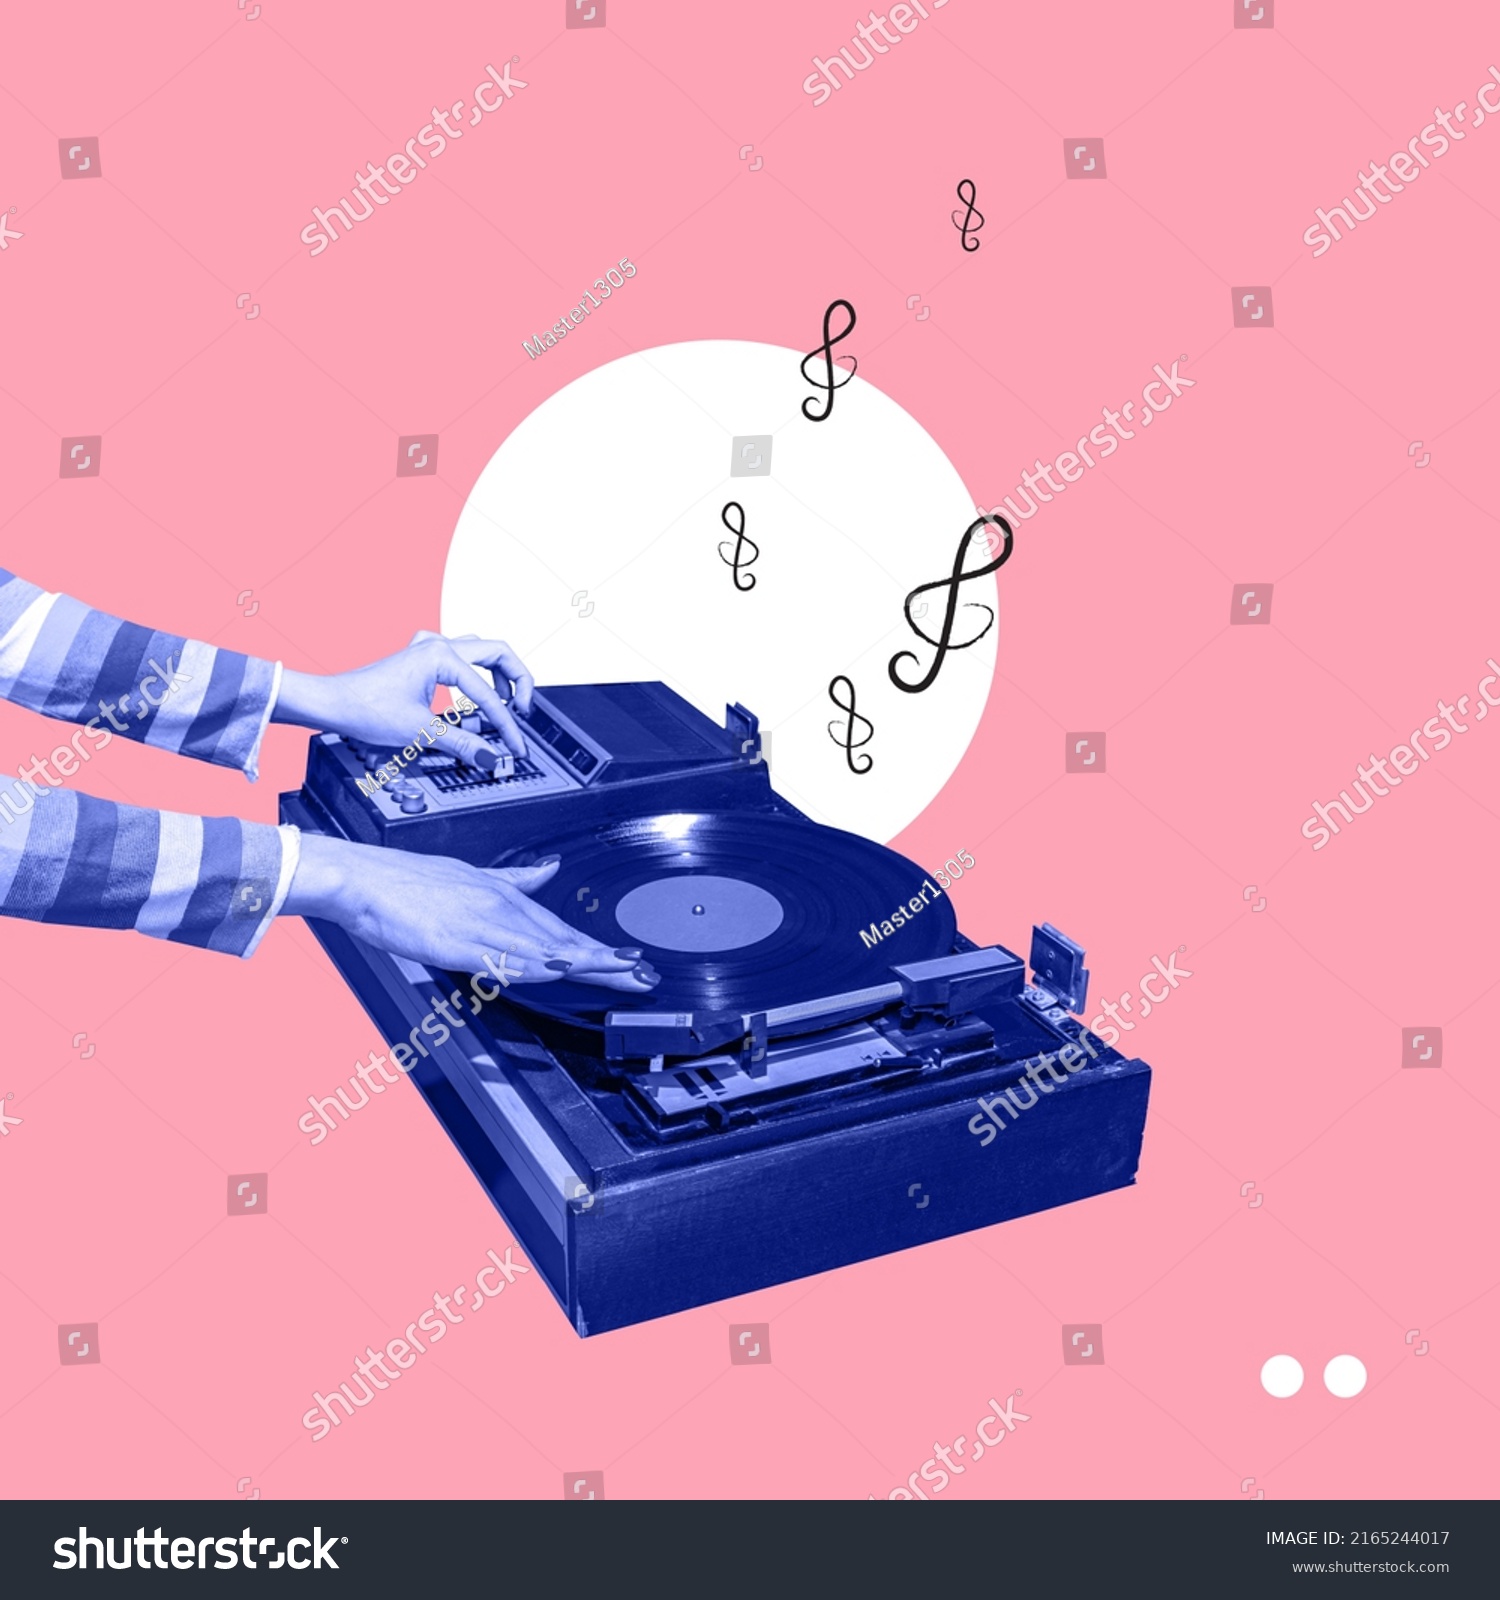 Colorful image of female hands spinning retro vinyl record player like a dj isolated over pink background. Contemporary art collage. Poster graphics. Concept of fashion, music, mix old and modernity #2165244017